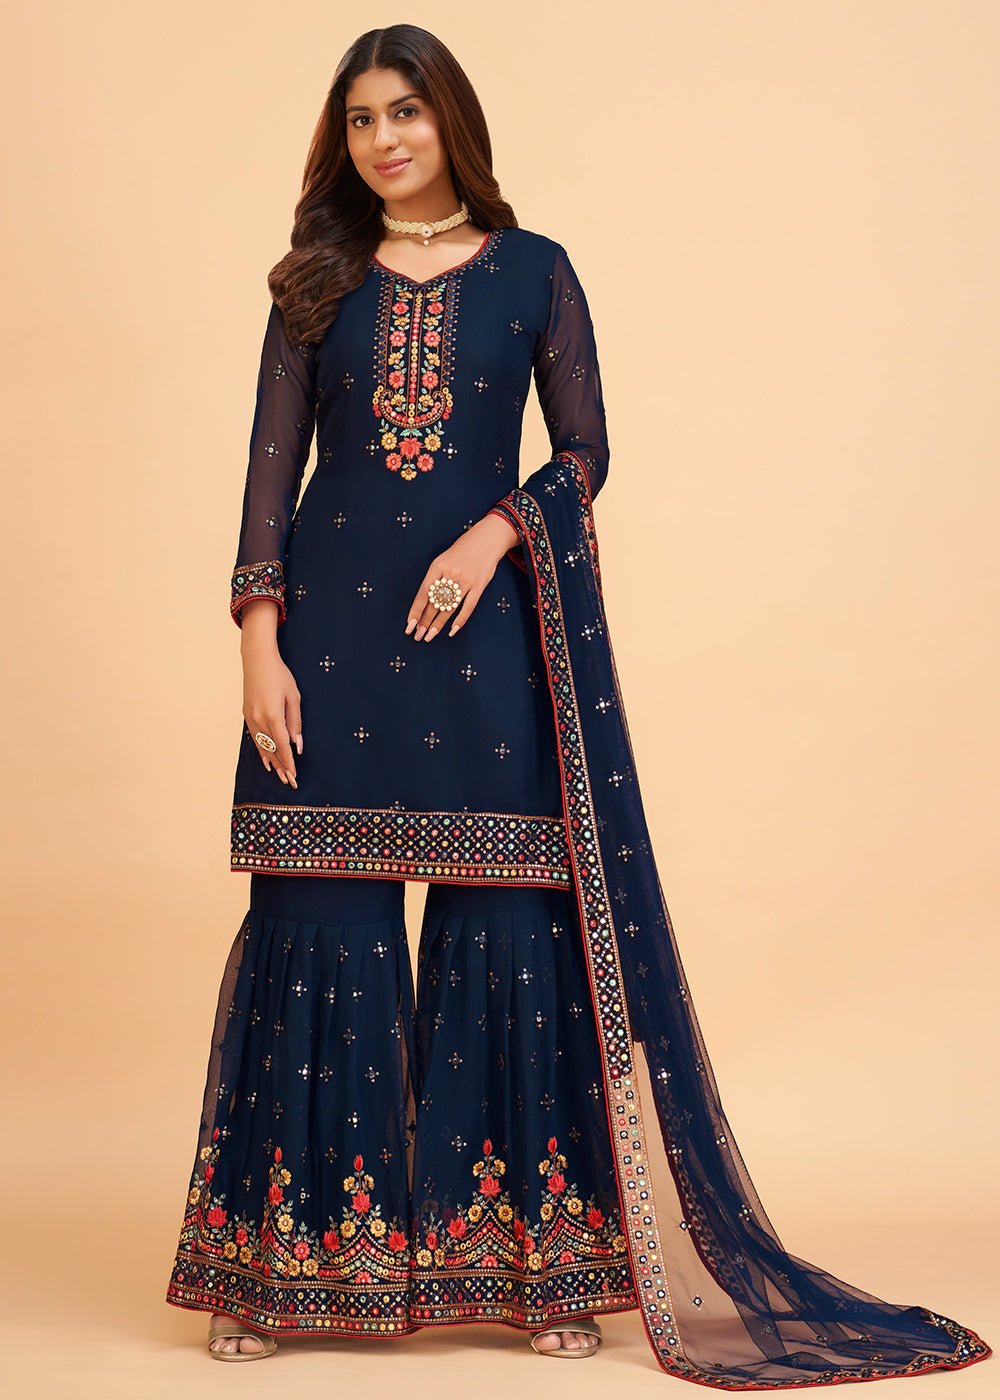 Shop Now Beguiling Dark Blue Wedding Embroidered Sharara Suit Online at Empress Clothing in USA, UK, Canada, Germany & Worldwide. 